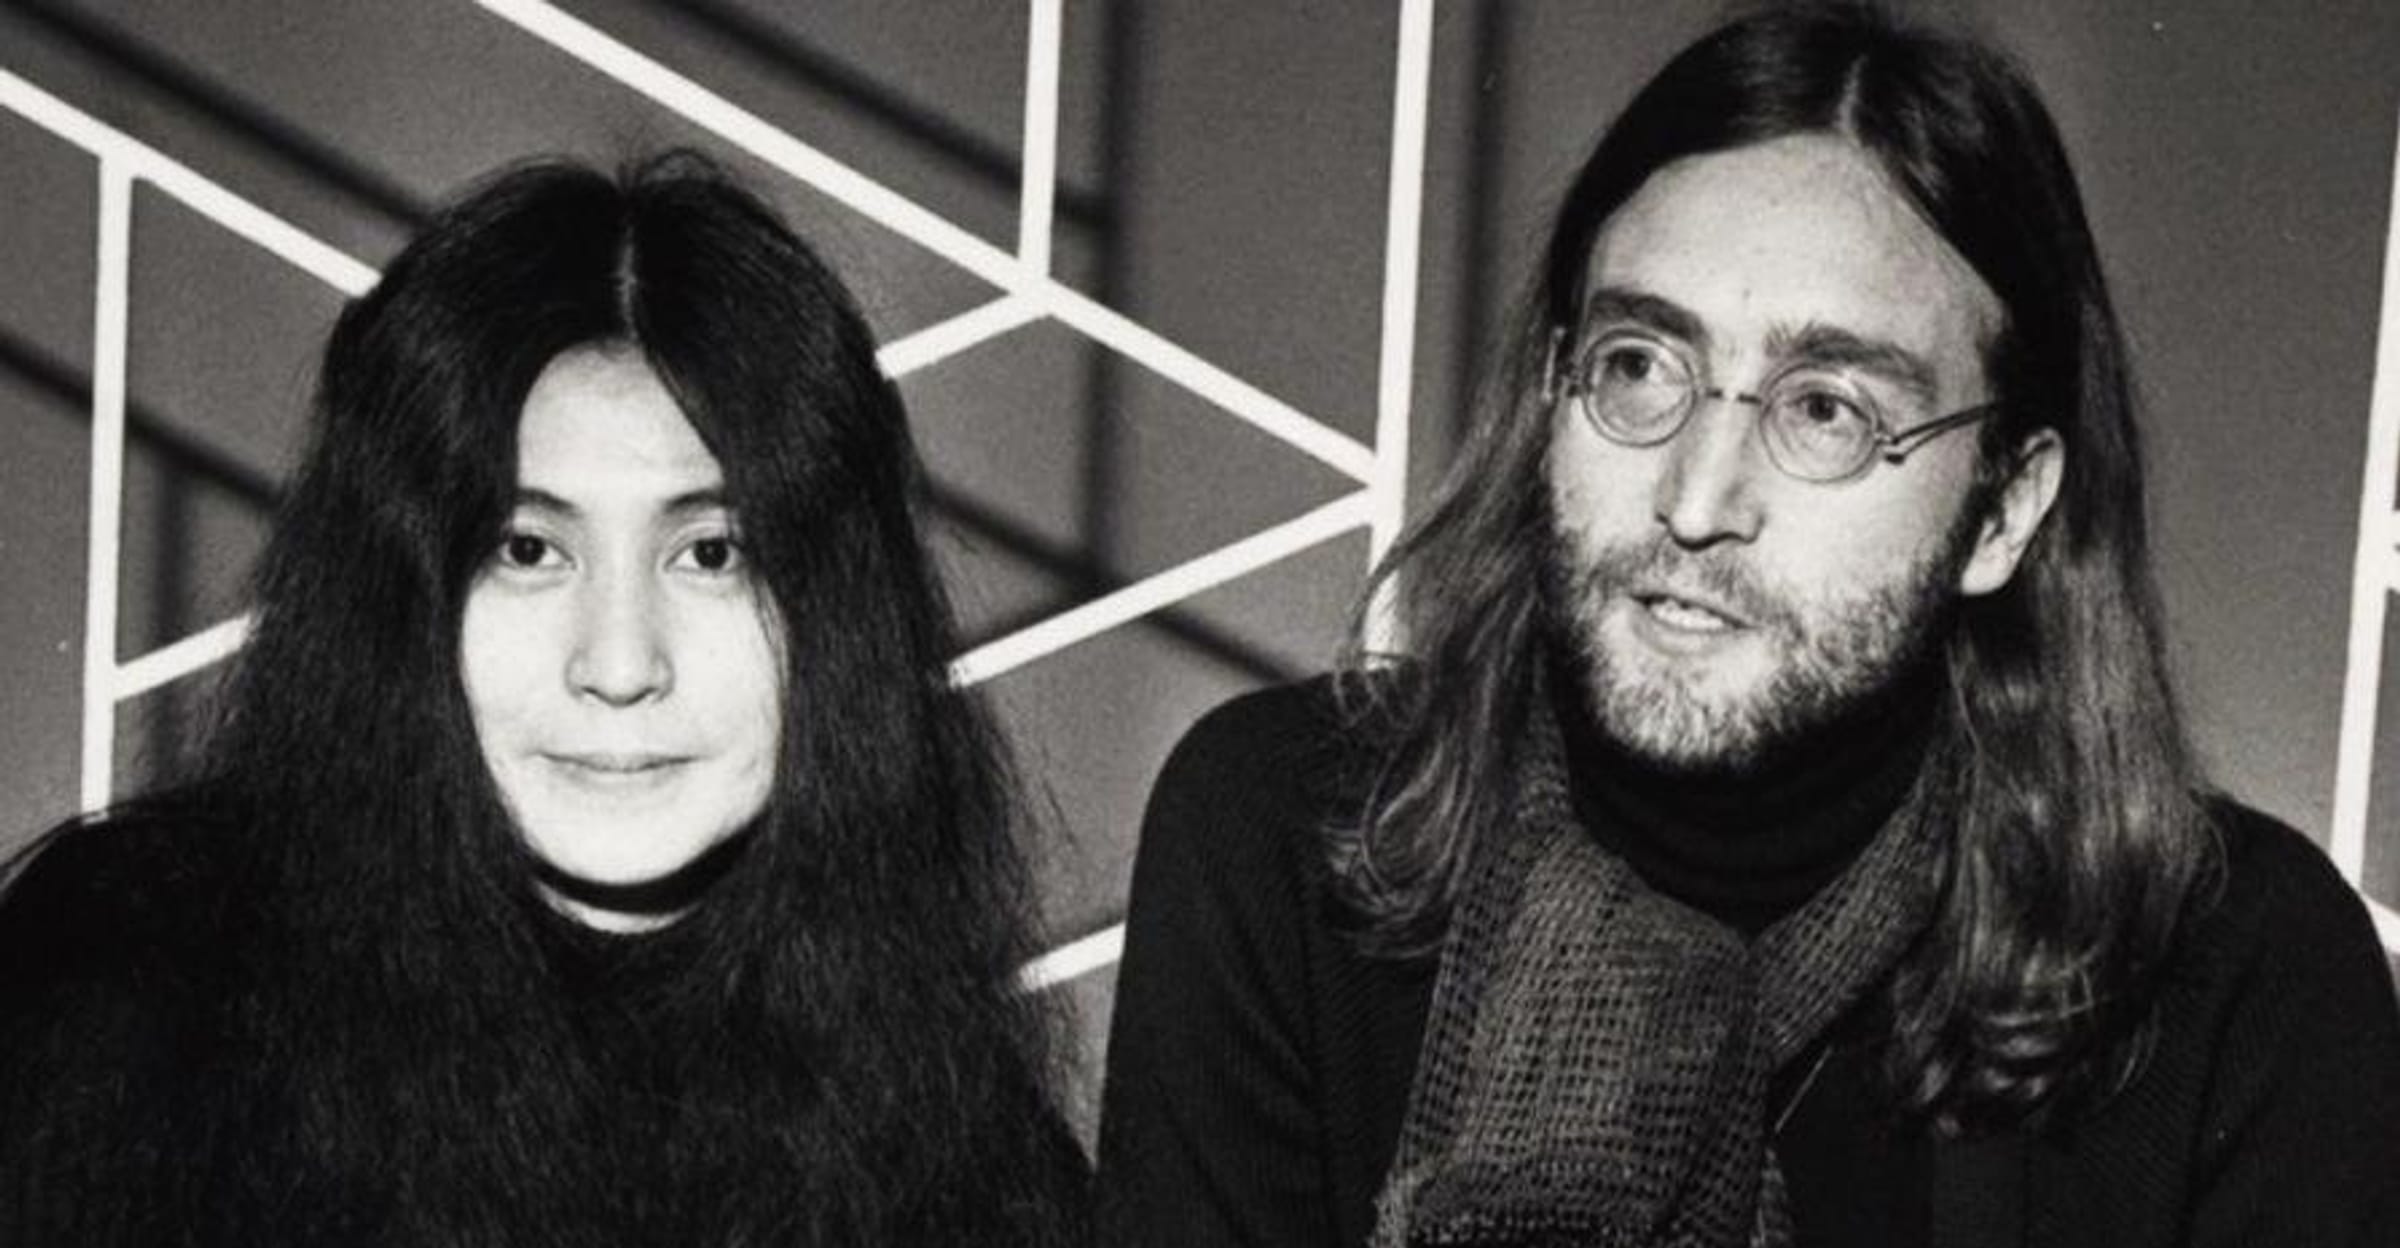 John Lennon's dark side from domestic violence and emotional abuse